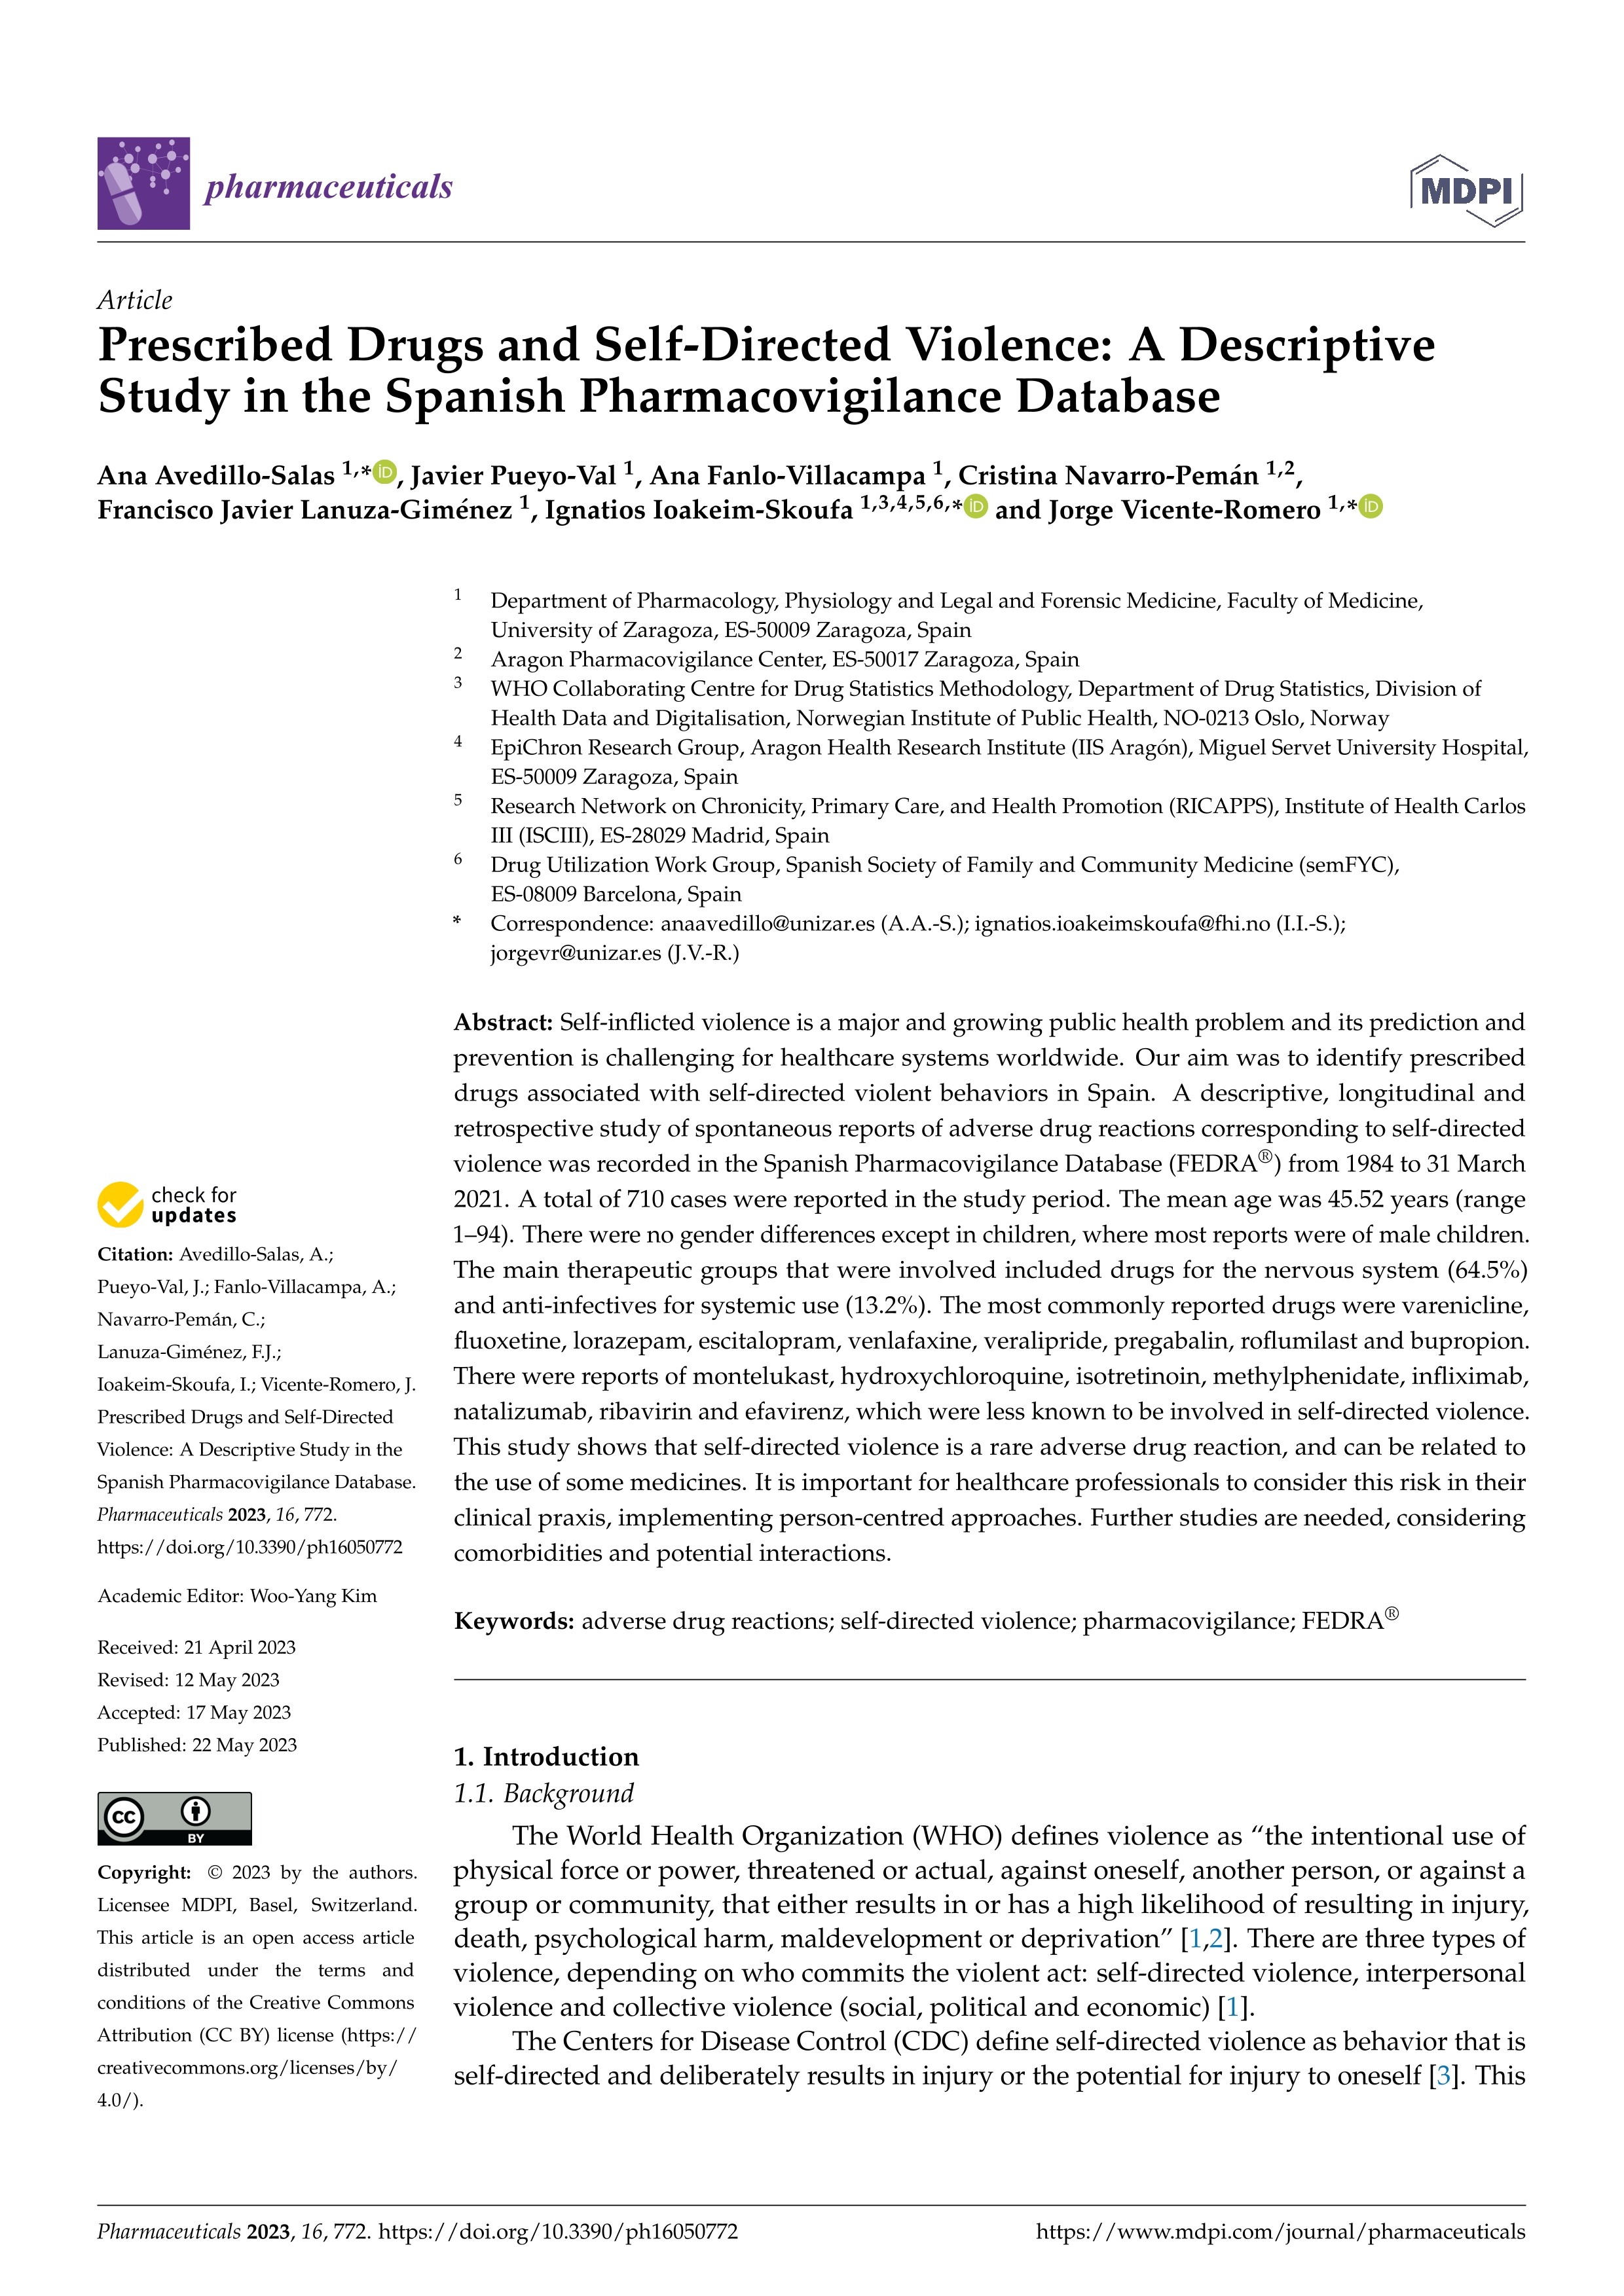 Prescribed drugs and self-directed violence: a descriptive study in the spanish pharmacovigilance database